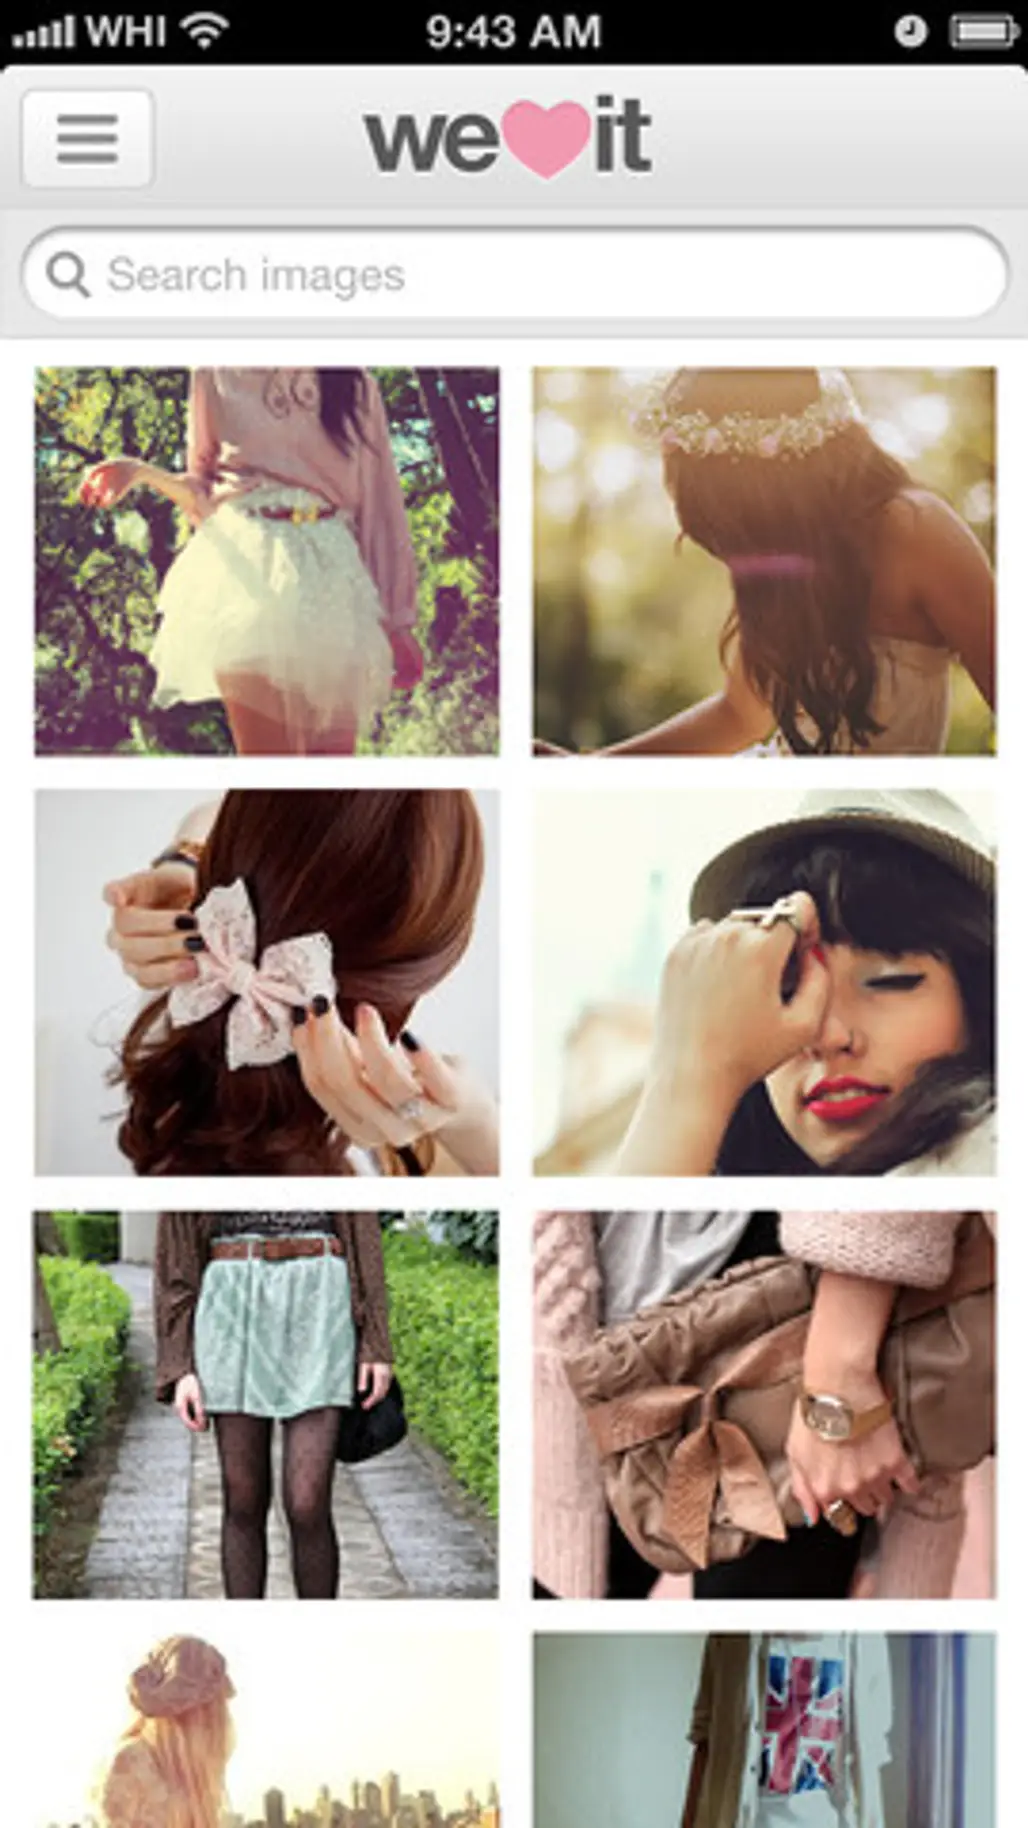 Weheartit